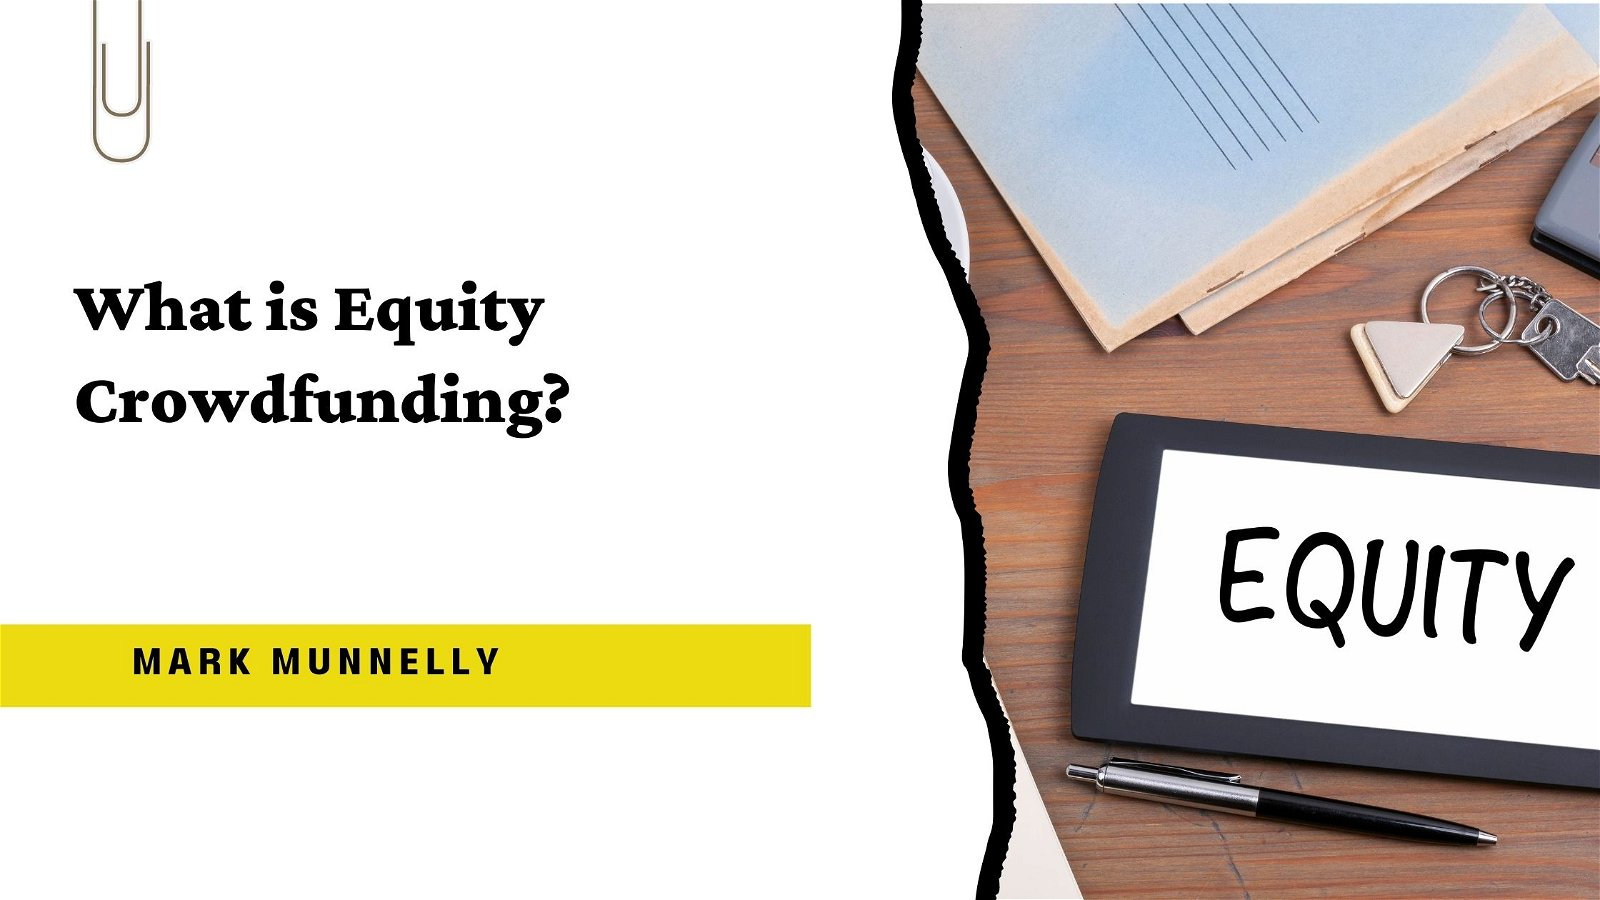 What is Equity Crowdfunding